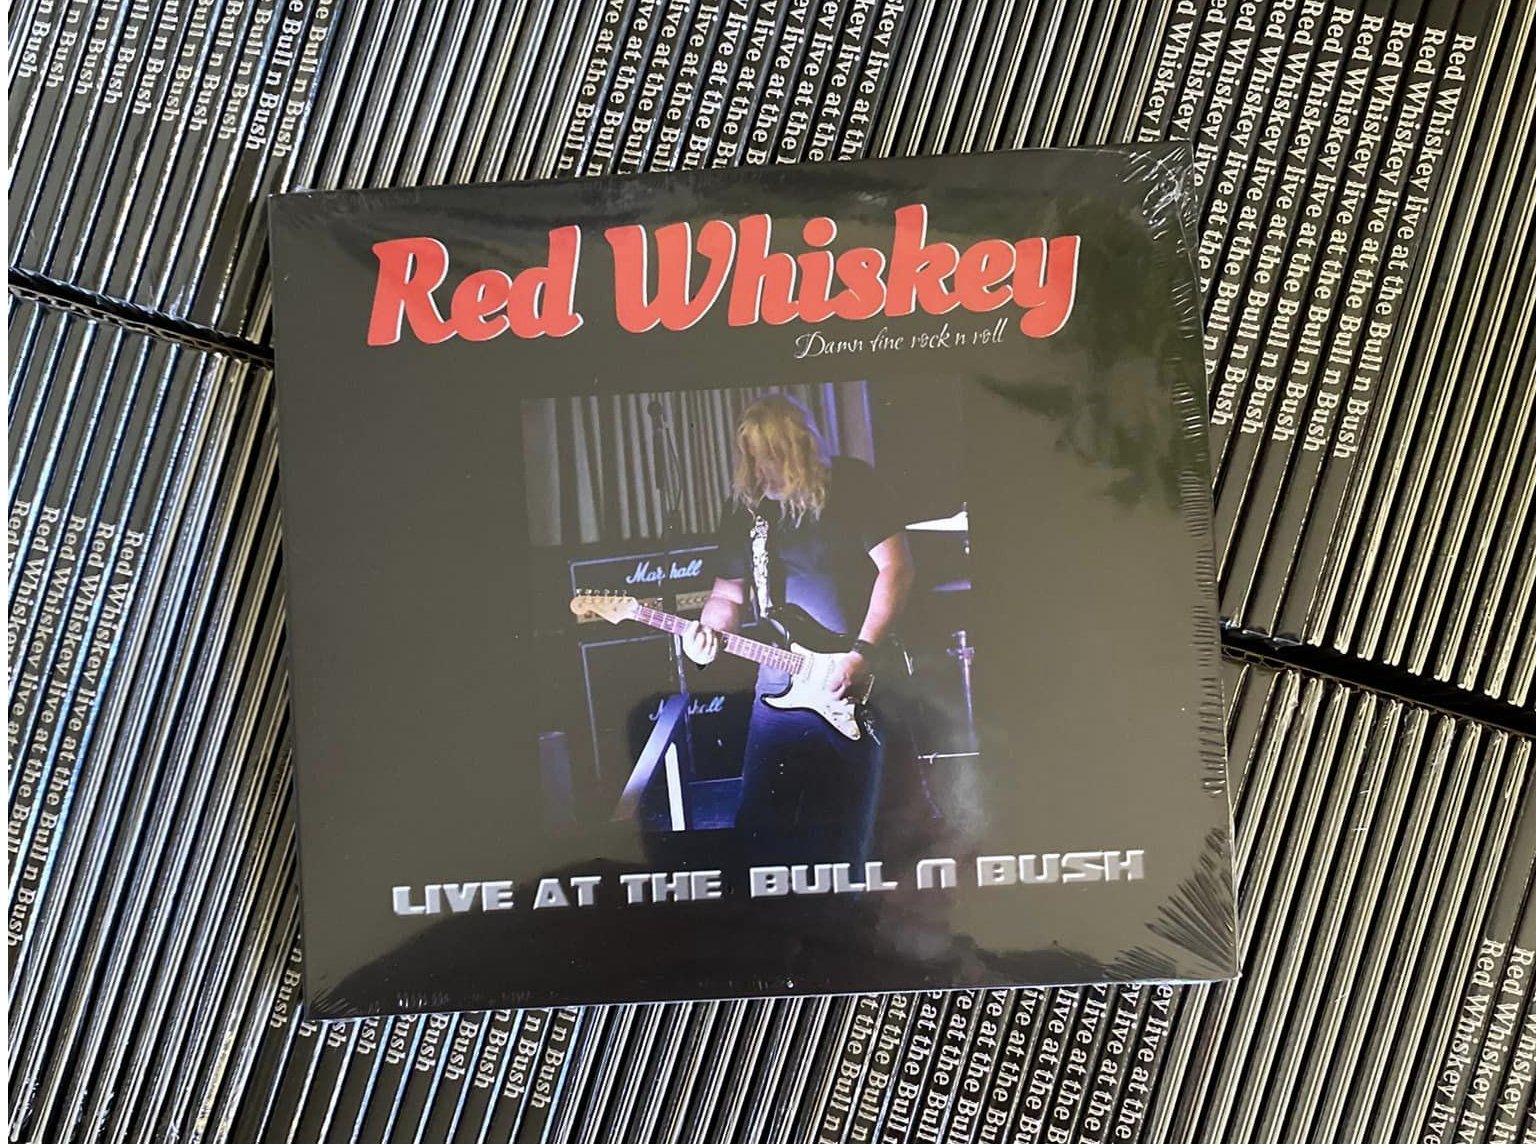 Red Whiskey Videos | ReverbNation